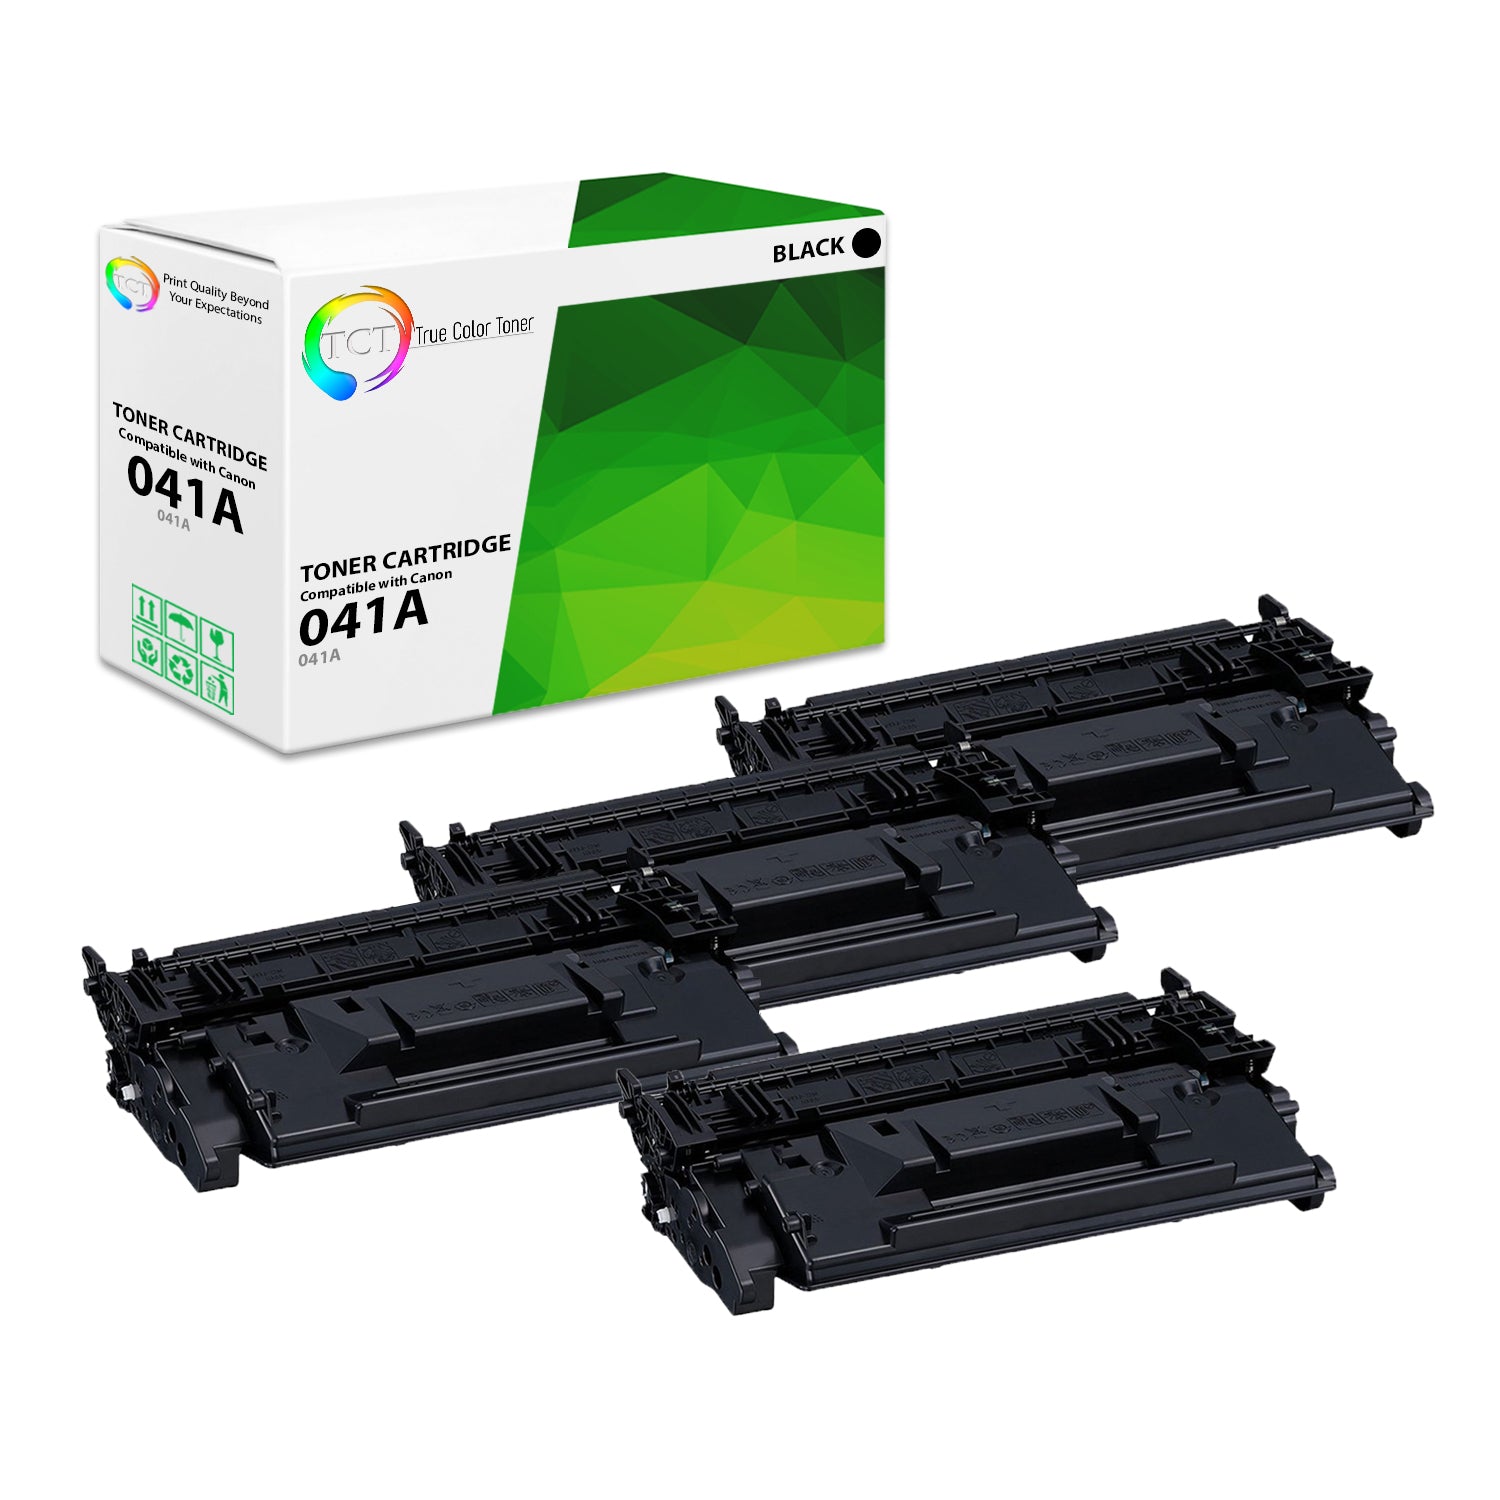 TCT Compatible Toner Cartridge Replacement for the Canon 041 Series - 4 Pack Black